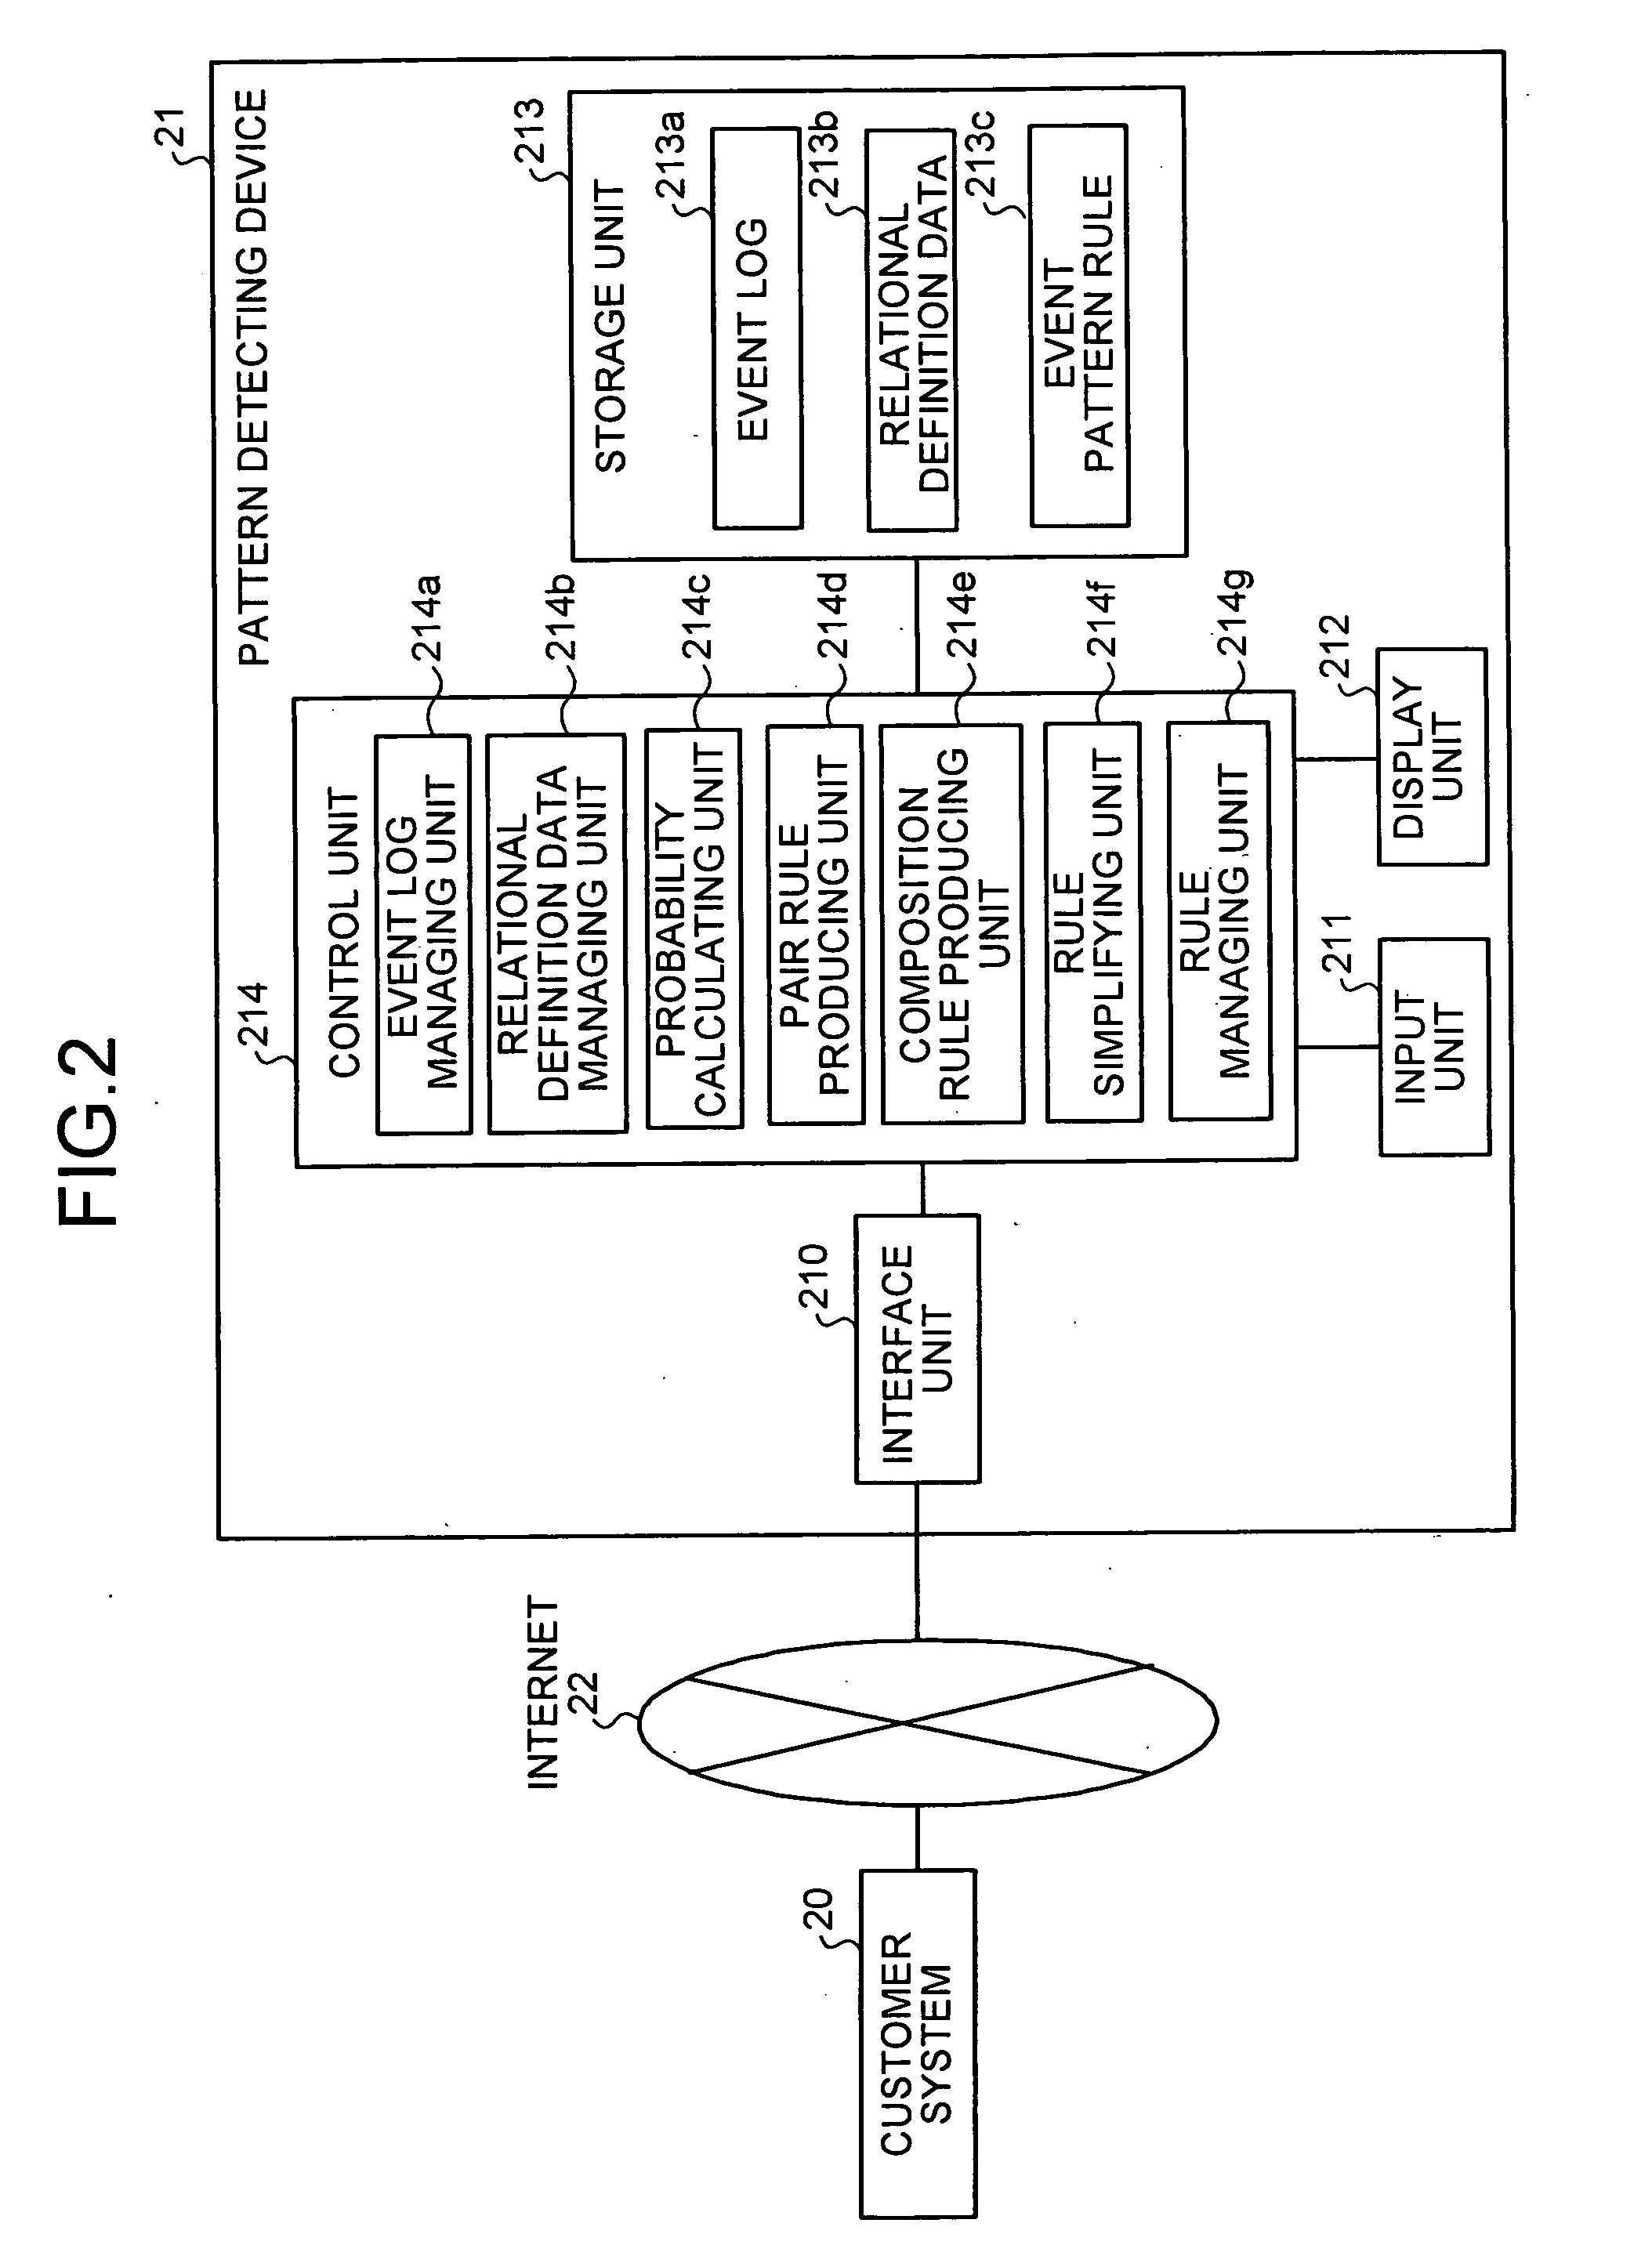 Apparatus, method, and computer product for pattern detection